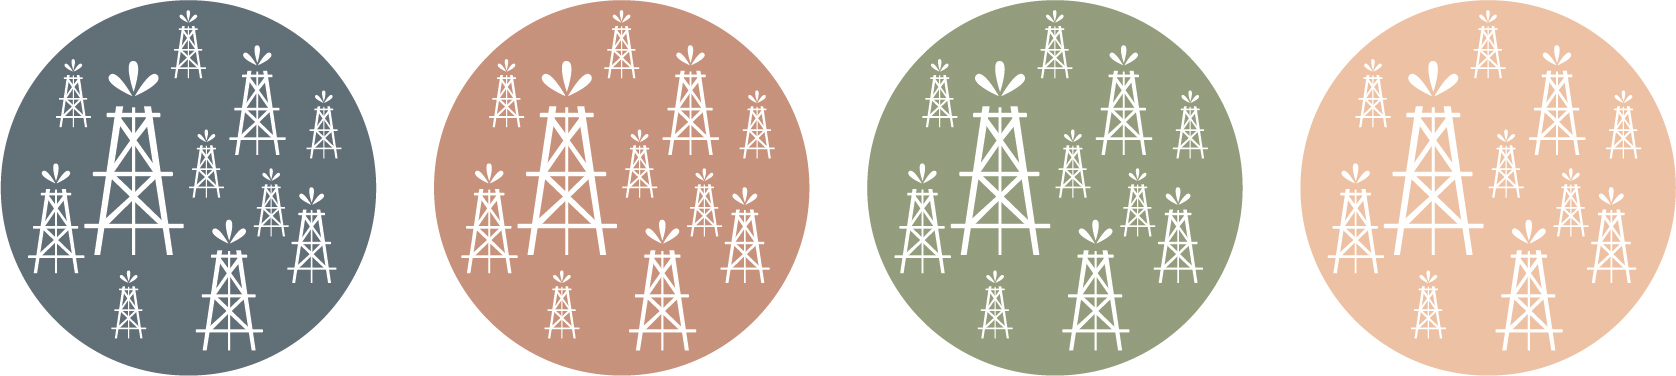 Image collage with alternating colors of oil wells clip art